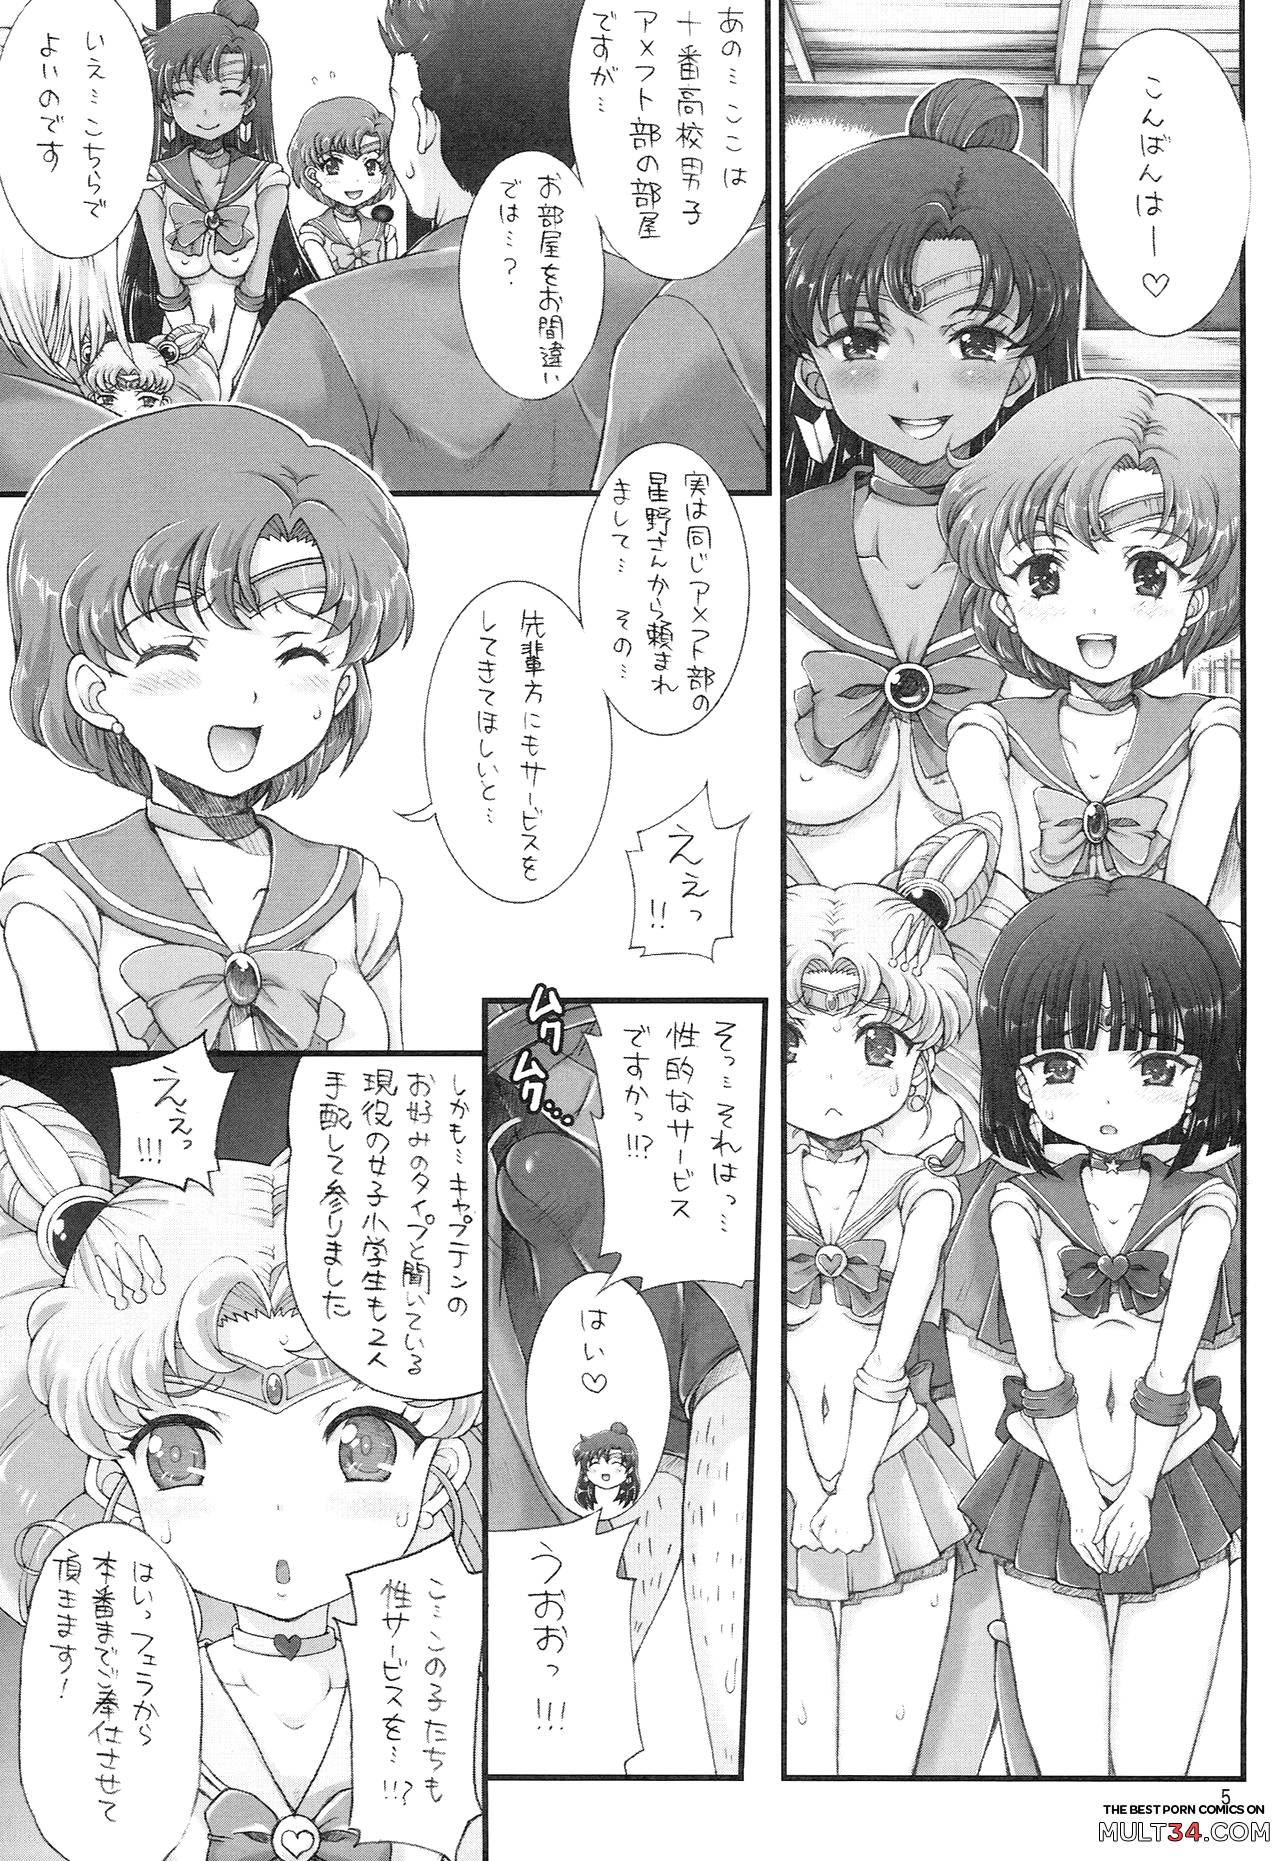 Sailor Delivery Health AS page 4